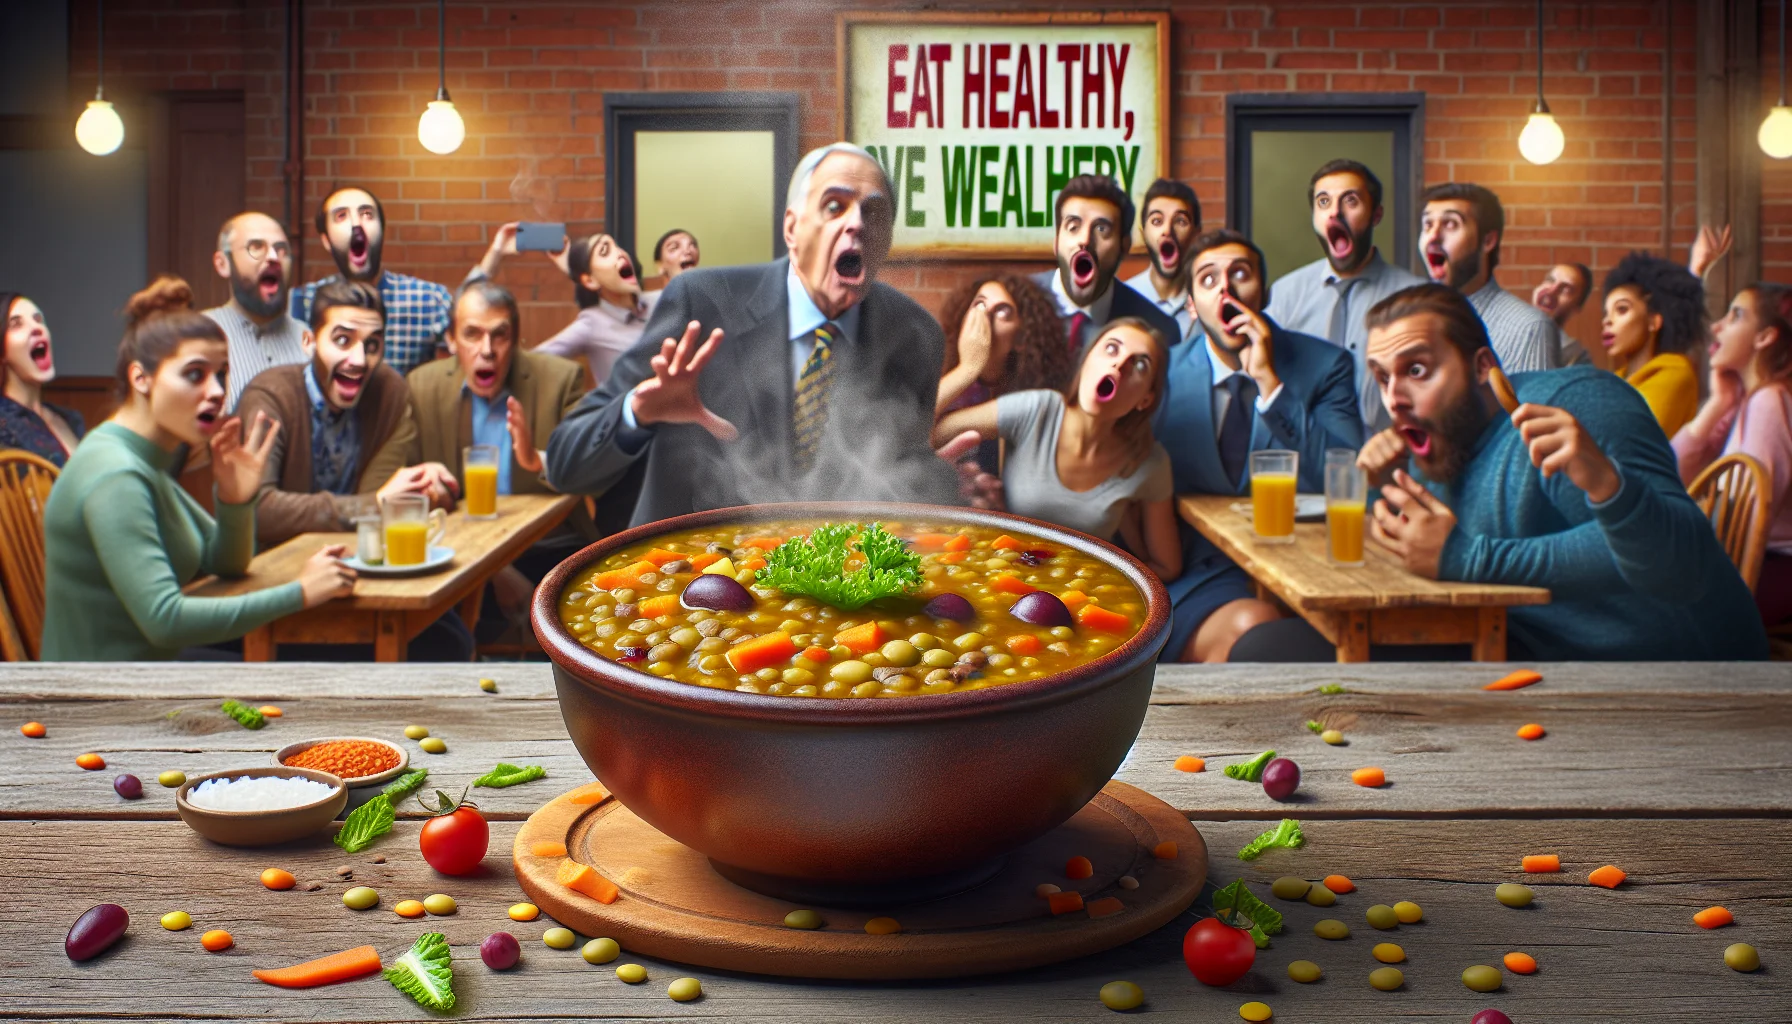 Create a humorous and realistic image portraying an immersive scene at a budget-friendly restaurant. The star of the show is a steaming, appetizing bowl of lentil soup placed prominently on a rustic wooden table. The soup is exuding an array of vibrant colors from the assortment of vegetables within it. In the background, various customers are visibly impressed and excited about their choice of affordable, yet nutritious meal. There's a playful sign hanging on the wall which says 'Eat Healthy, Save Wealthy' further emphasizing the idea of eating healthy on a budget.